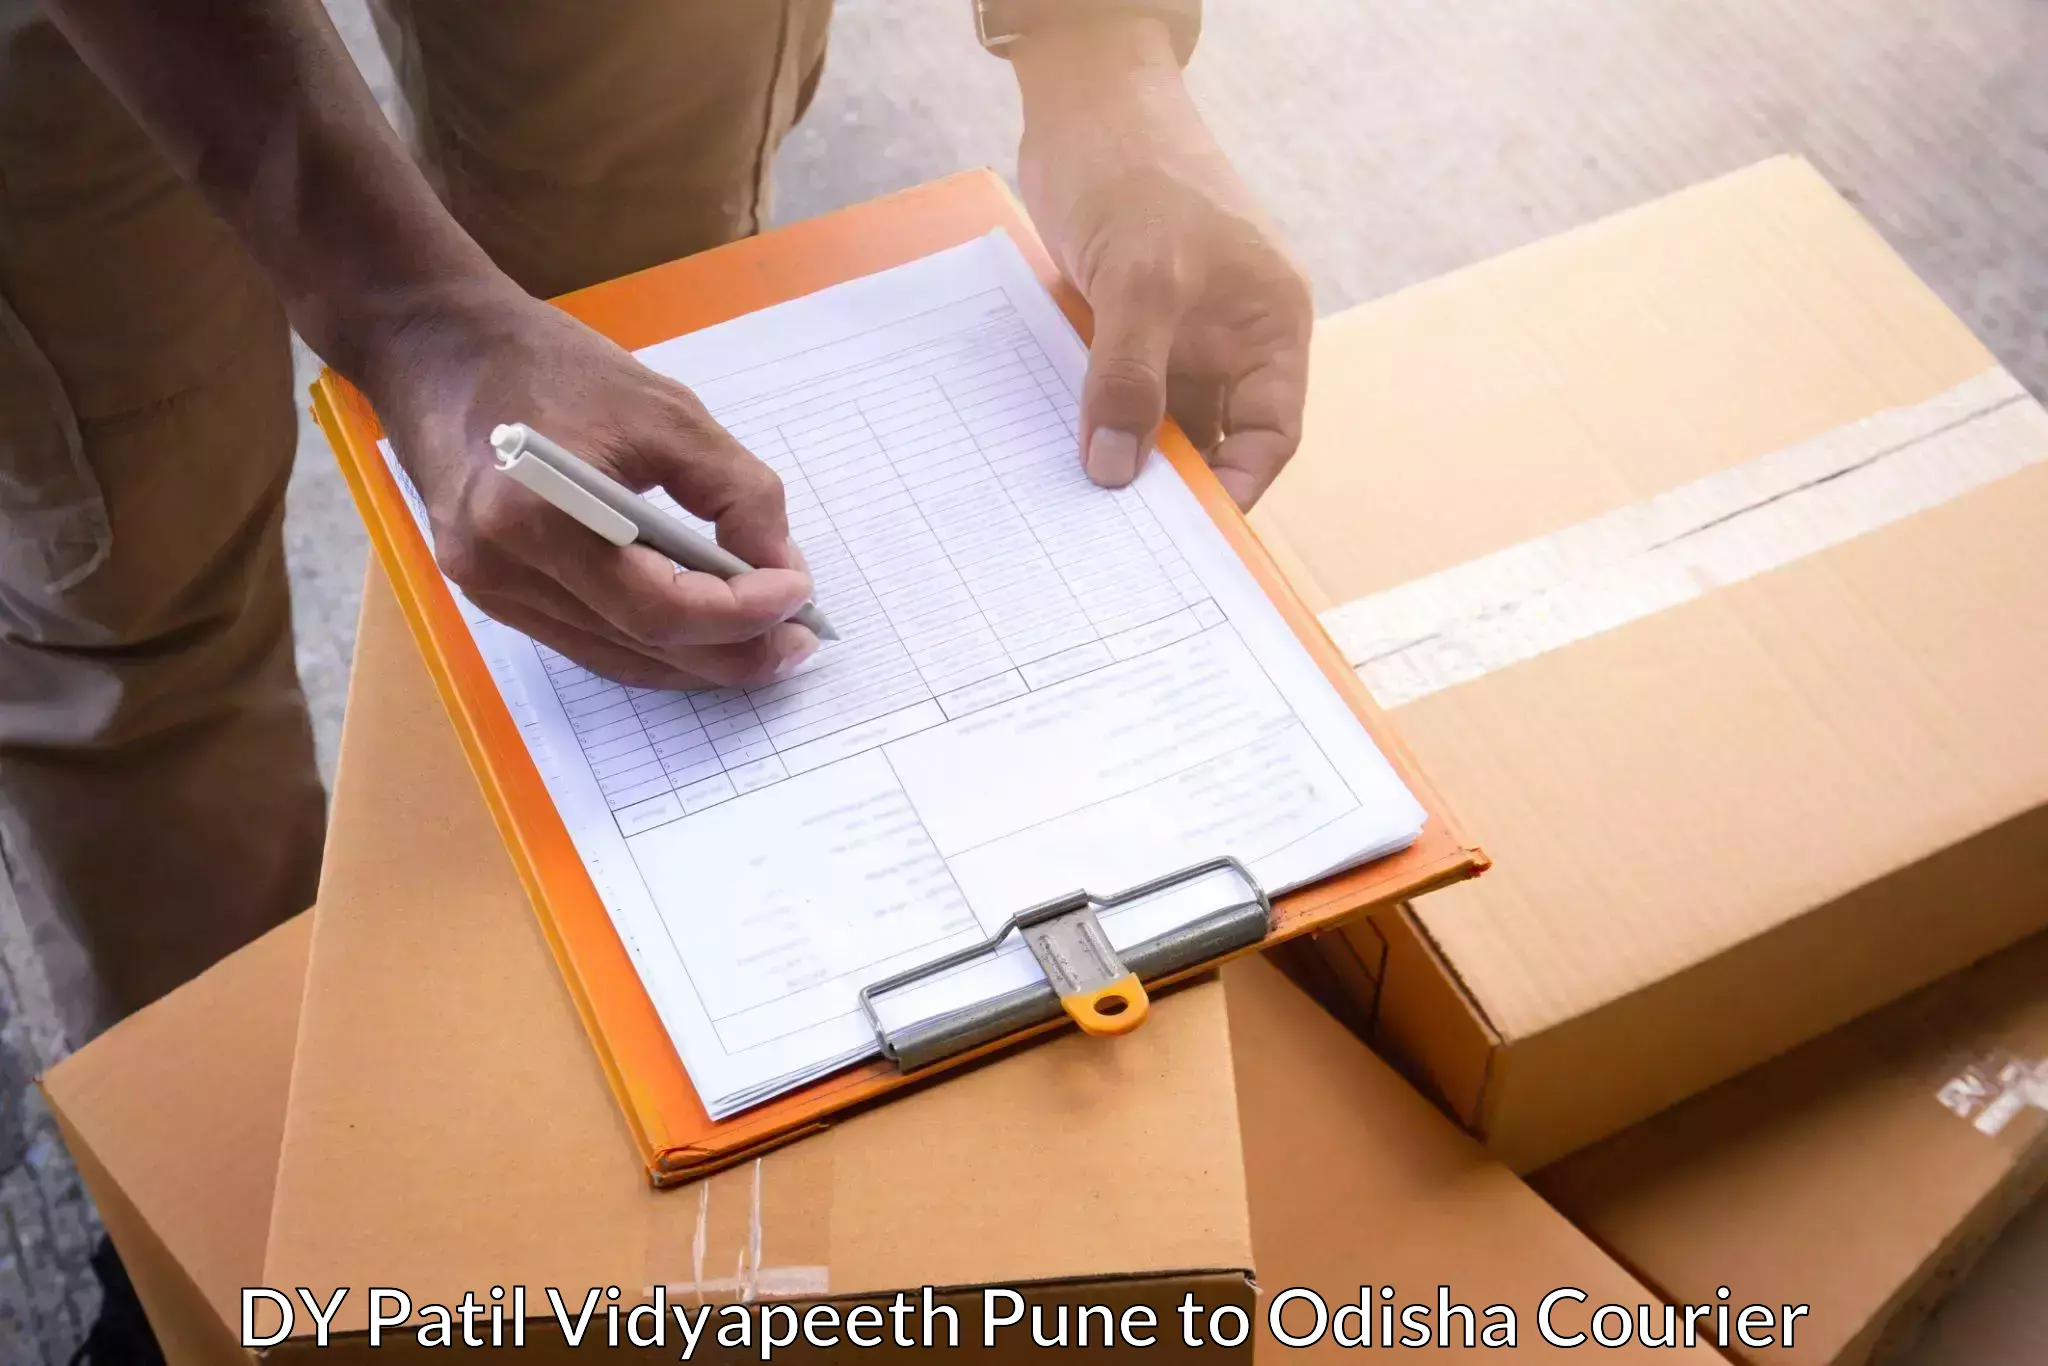 Full-service courier options DY Patil Vidyapeeth Pune to Chandipur